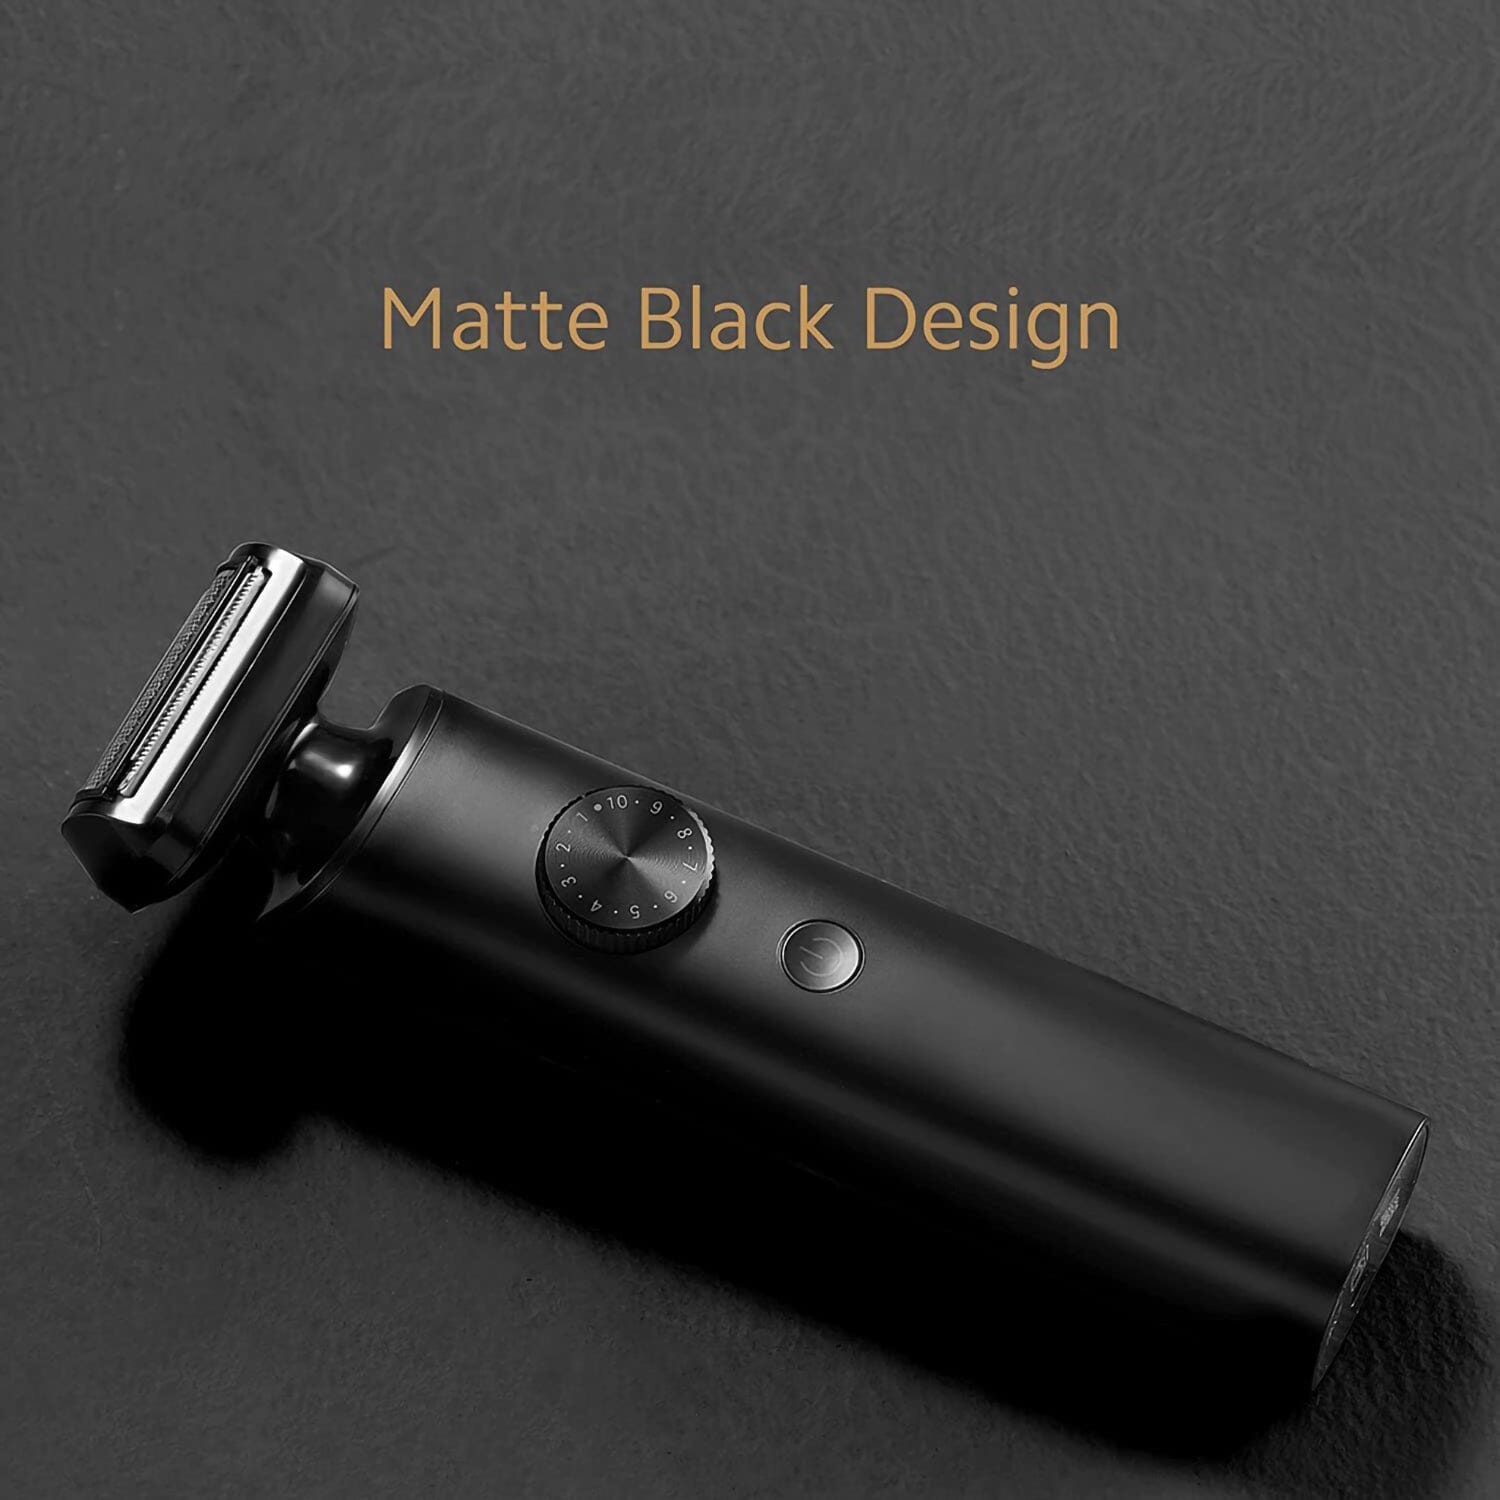 Xiaomi Grooming Kit Pro, Multiple grooming heads, IPX7, for Beard, Body, Face, Nose, and Ear Hair Trimmer, Shaver [Local Official Warranty] Xiaomi 